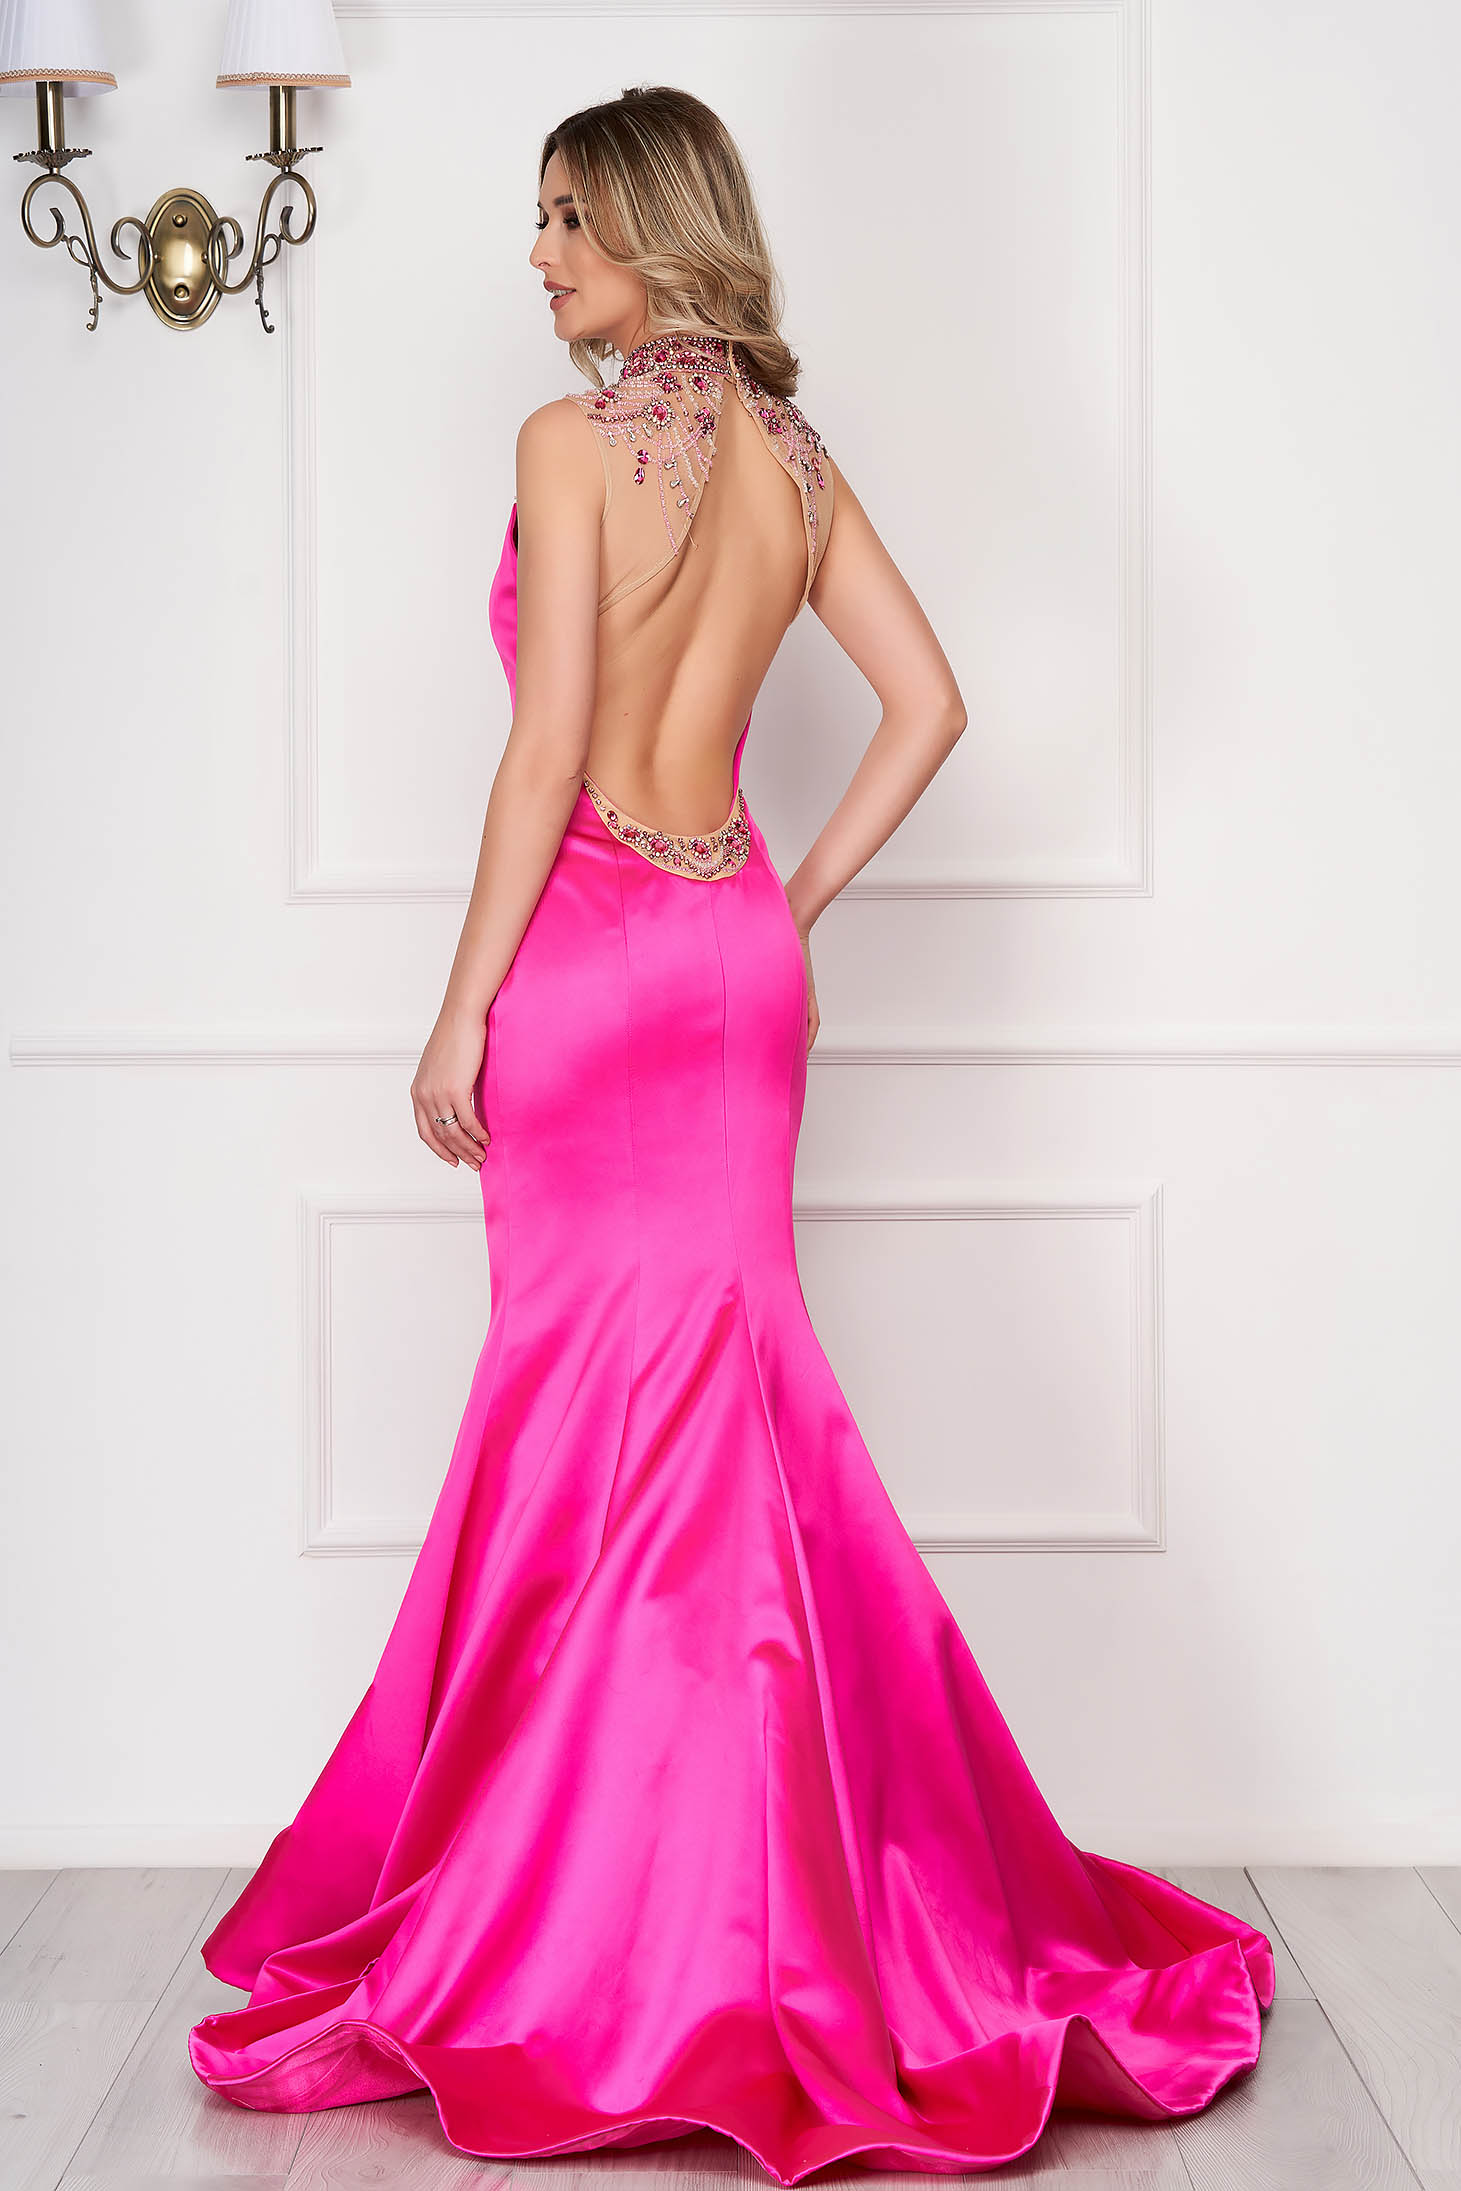 Sherri Hill pink dress with push-up cups from satin fabric texture luxurious mermaid cut bare back 2 - StarShinerS.com